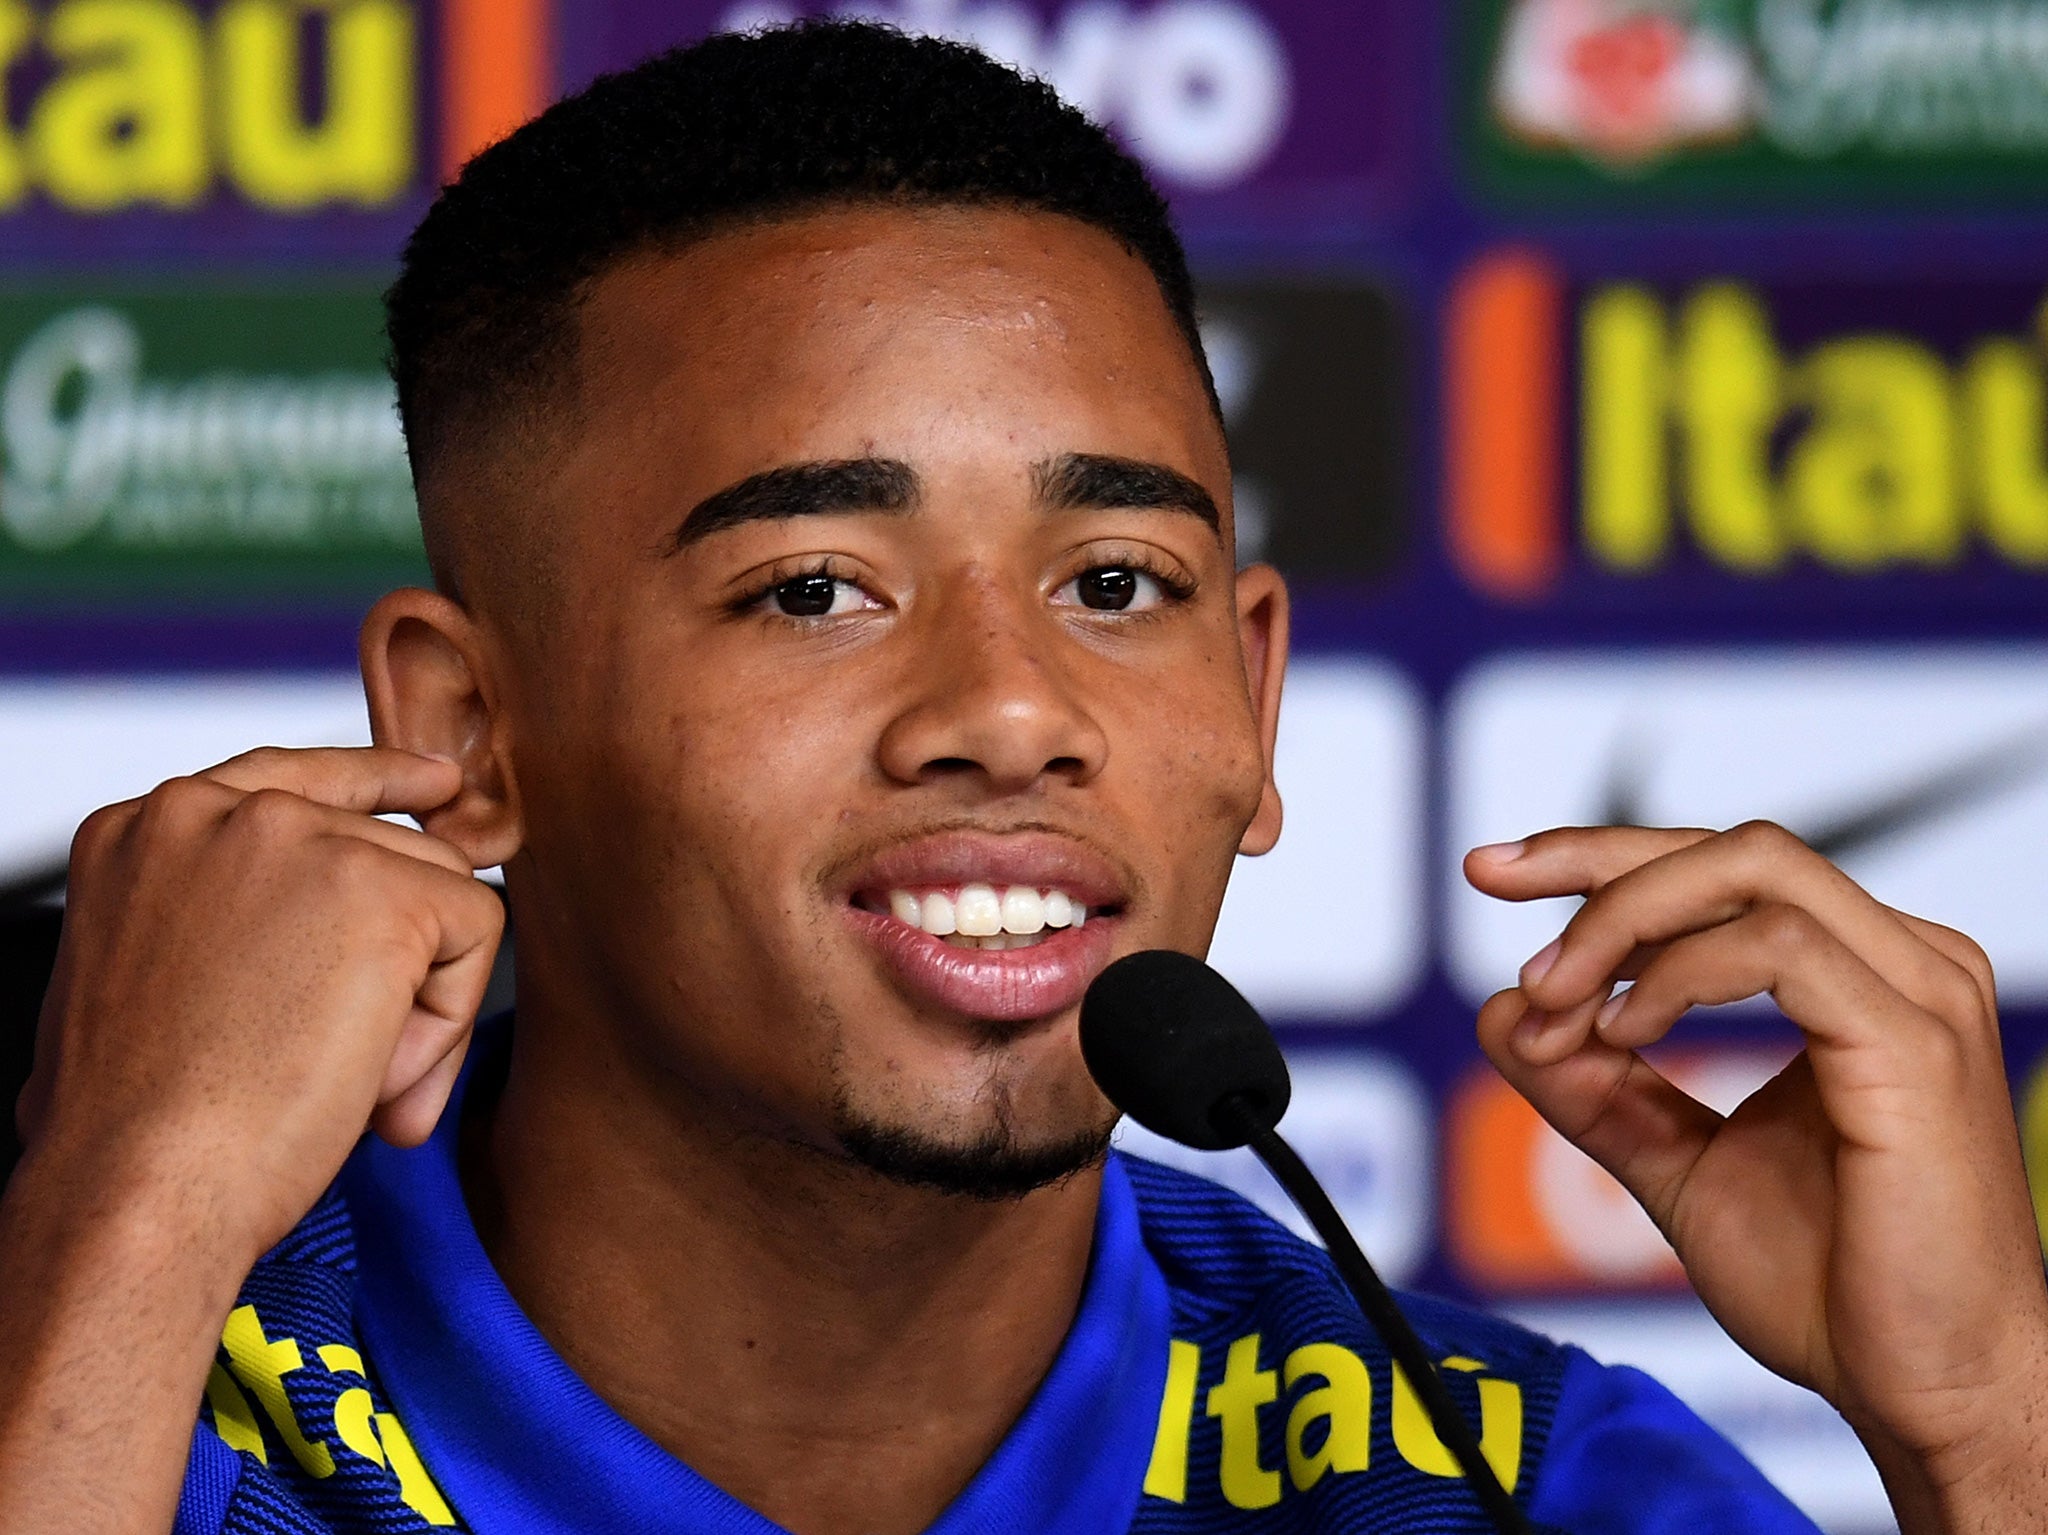 Gabriel Jesus has been hailed as the 'new Neymar' in some quarters